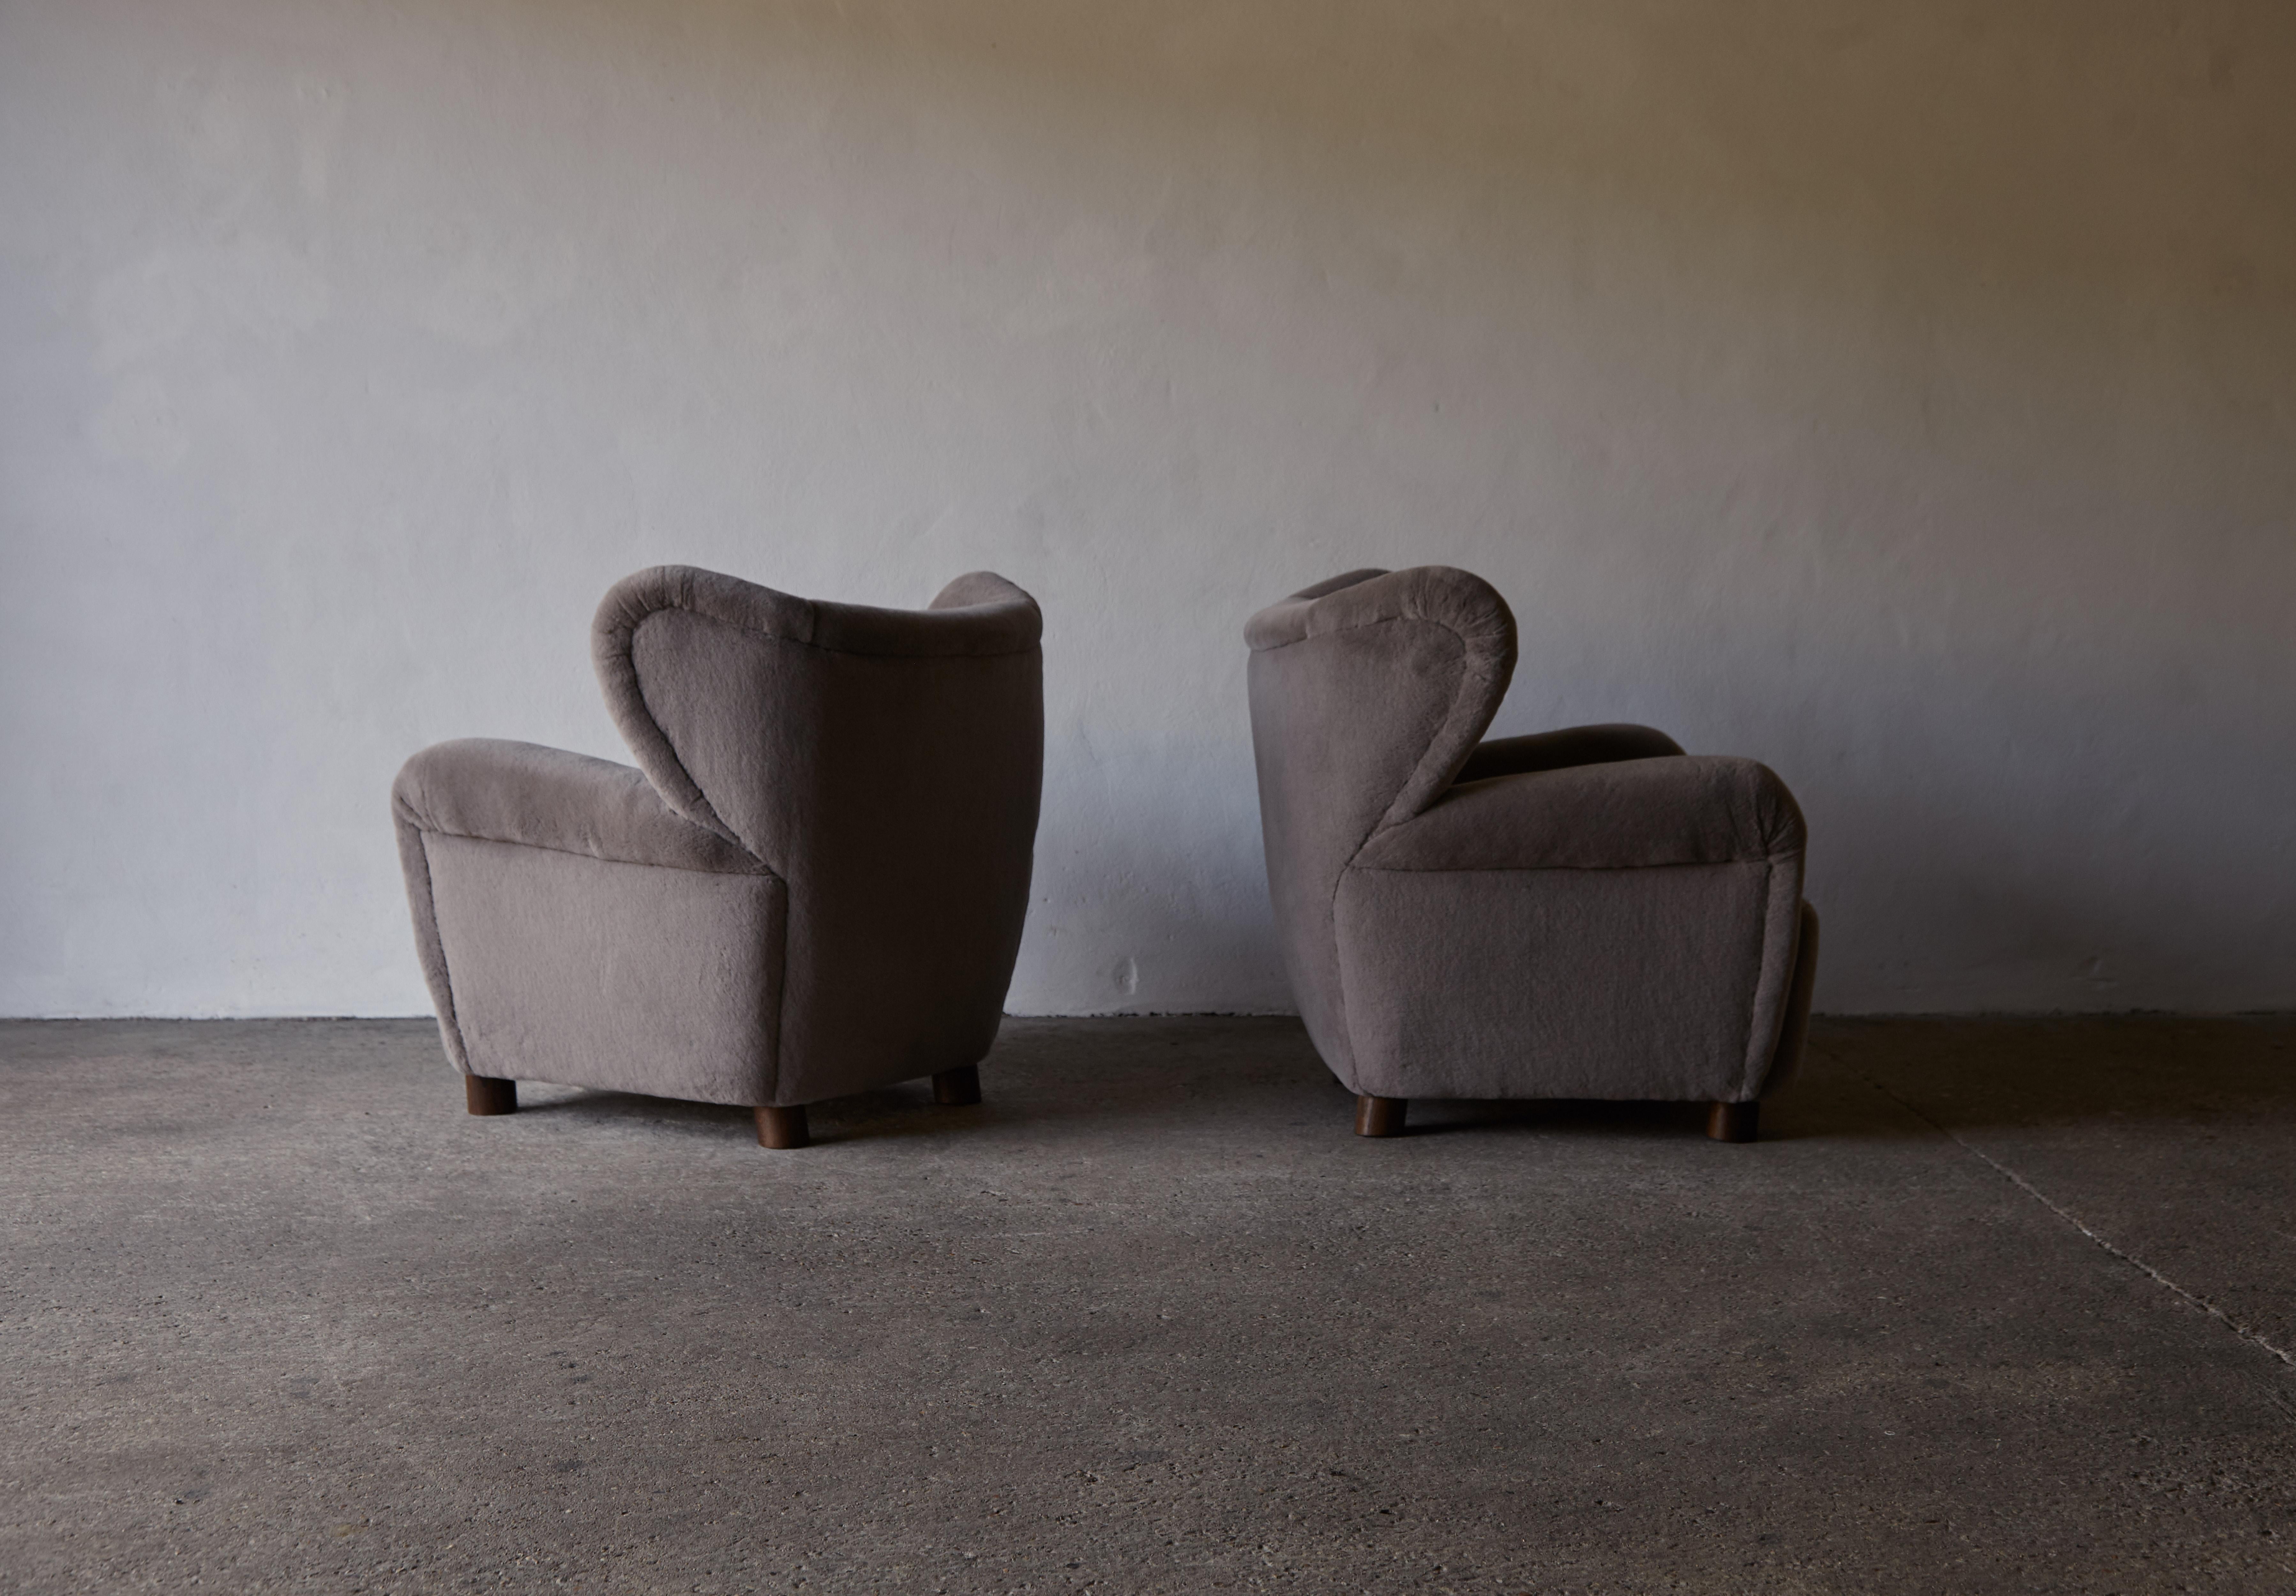 Superb Pair of Armchairs, Newly Upholstered in Pure Alpaca, Denmark, 1940s / 50s 10